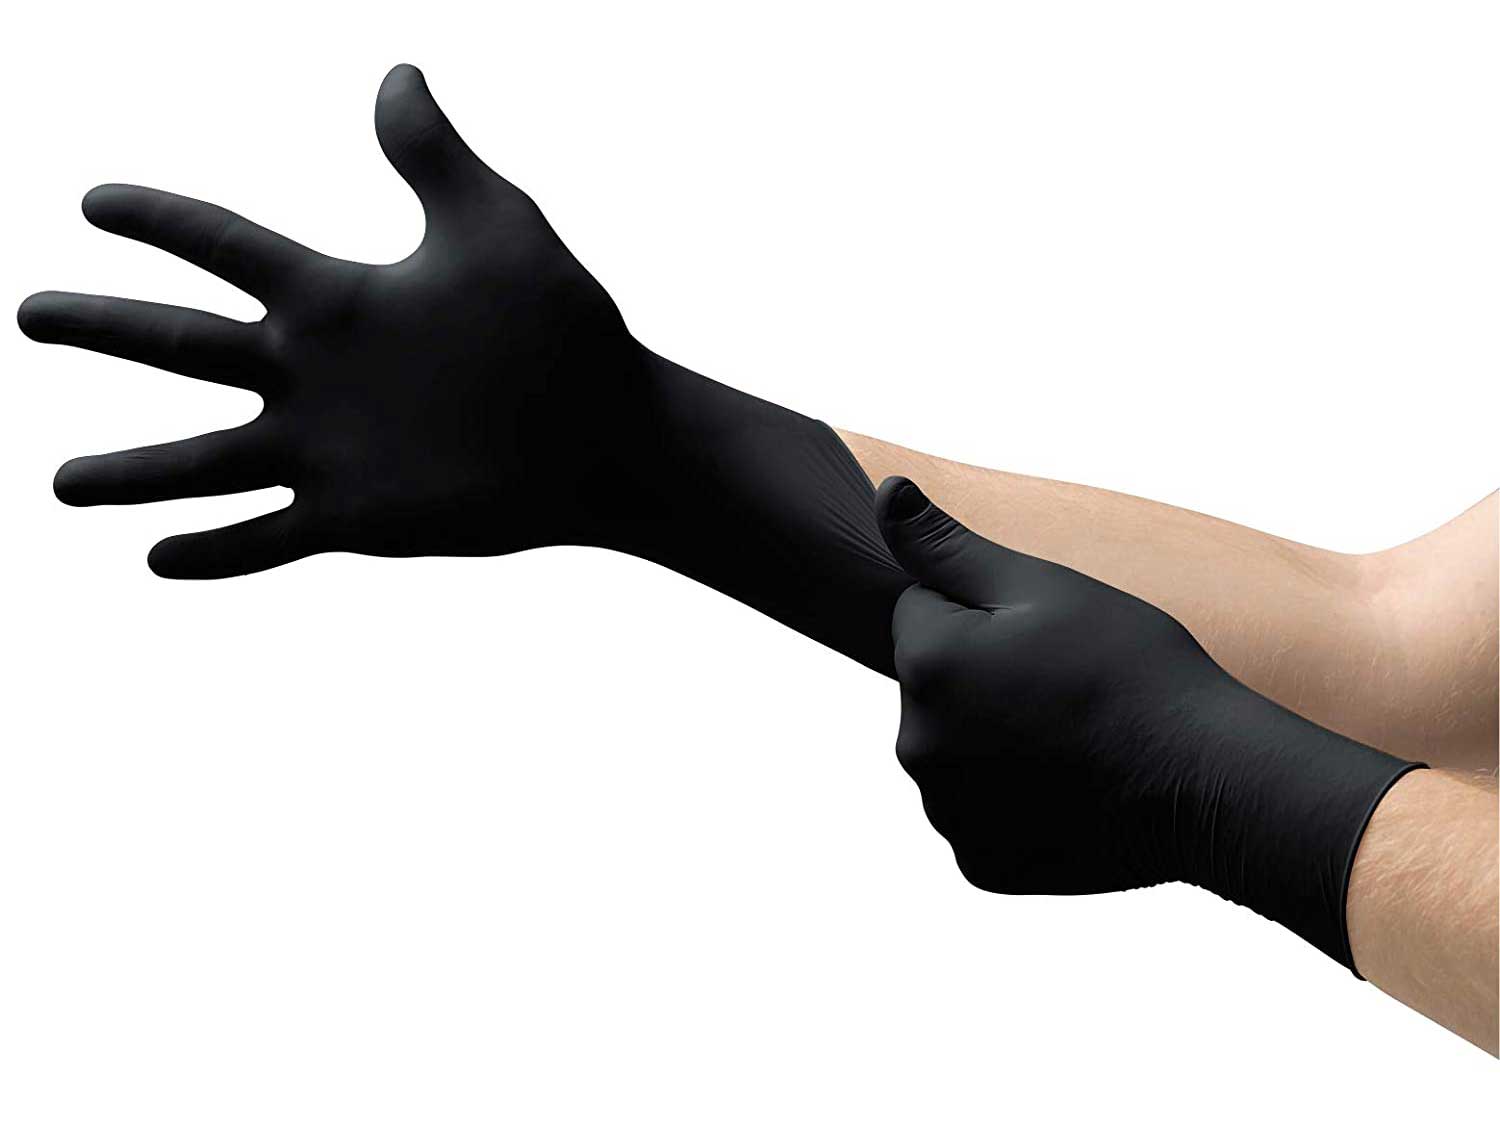 Microflex MK-296 Black Disposable Nitrile Gloves, Latex-Free, Powder-Free Glove for Mechanics, Automotive, Cleaning or Tattoo Applications, Medical/Exam Grade, Size Medium, Box of 100 Units